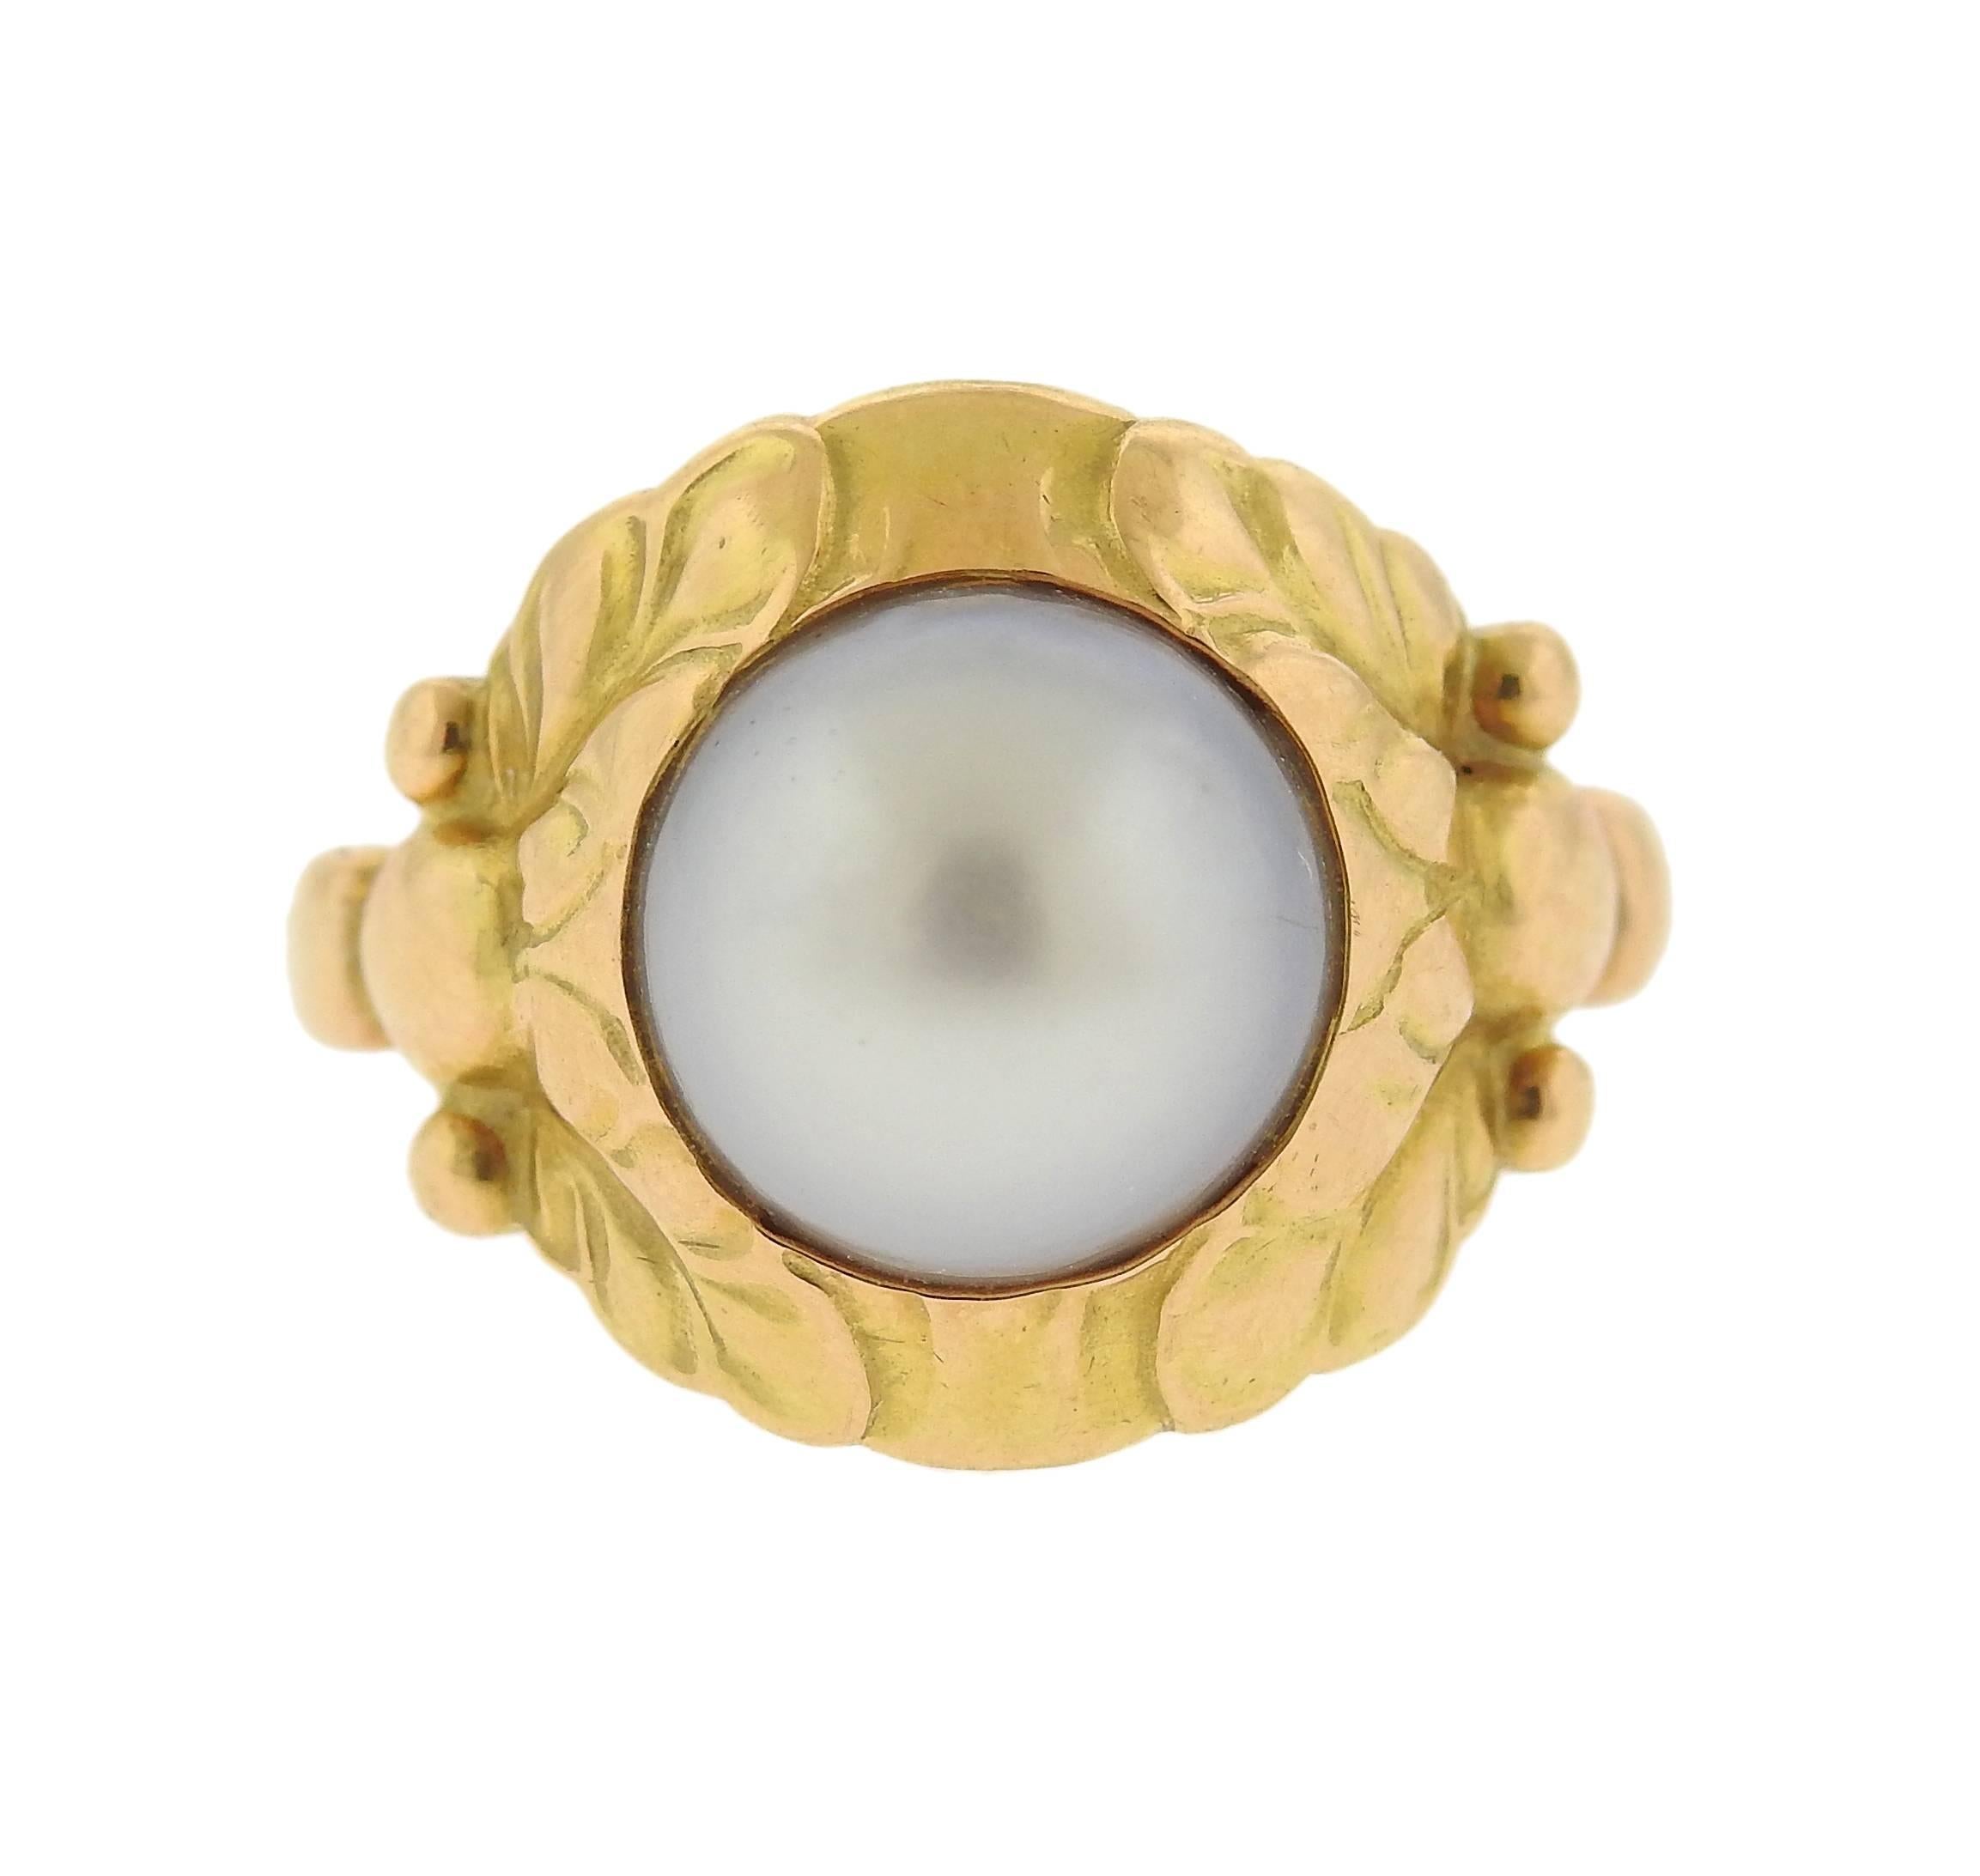 An 18k yellow gold ring, crafted by Georg Jensen, set with a 9.8mm pearl. Ring size - 7 1/4, ring top is 15mm. Marked: 76 18k, 111 B, Jensen hallmark. Weight of the piece - 4.3 grams.